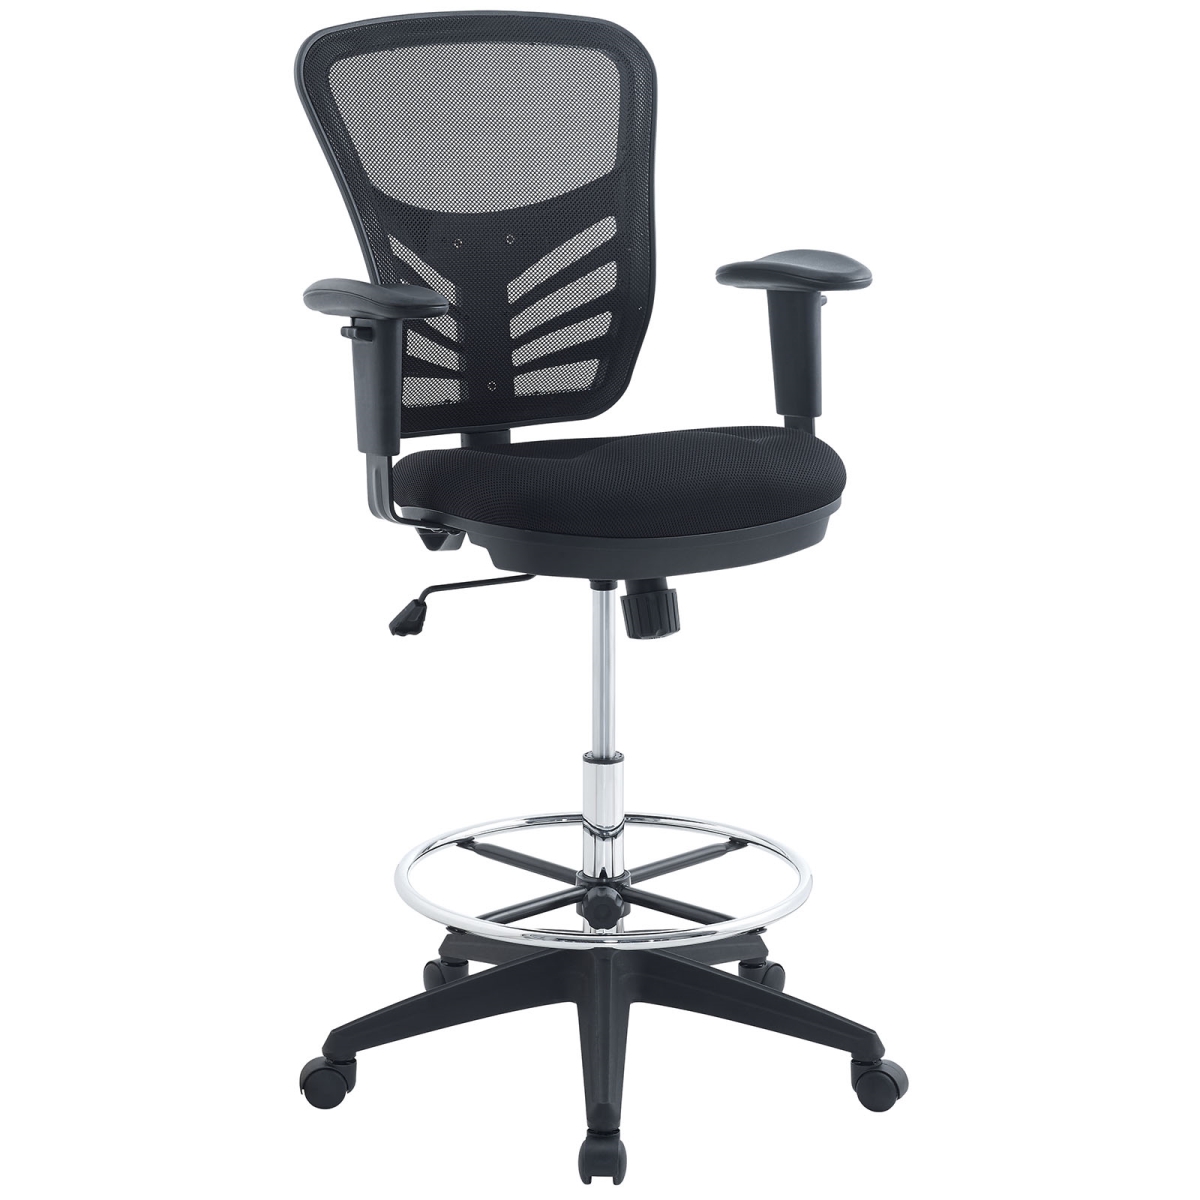 Modway Eei-2289-blk 42 H X 27.5 W X 26.5 L In. Articulate Drafting Chair, Black